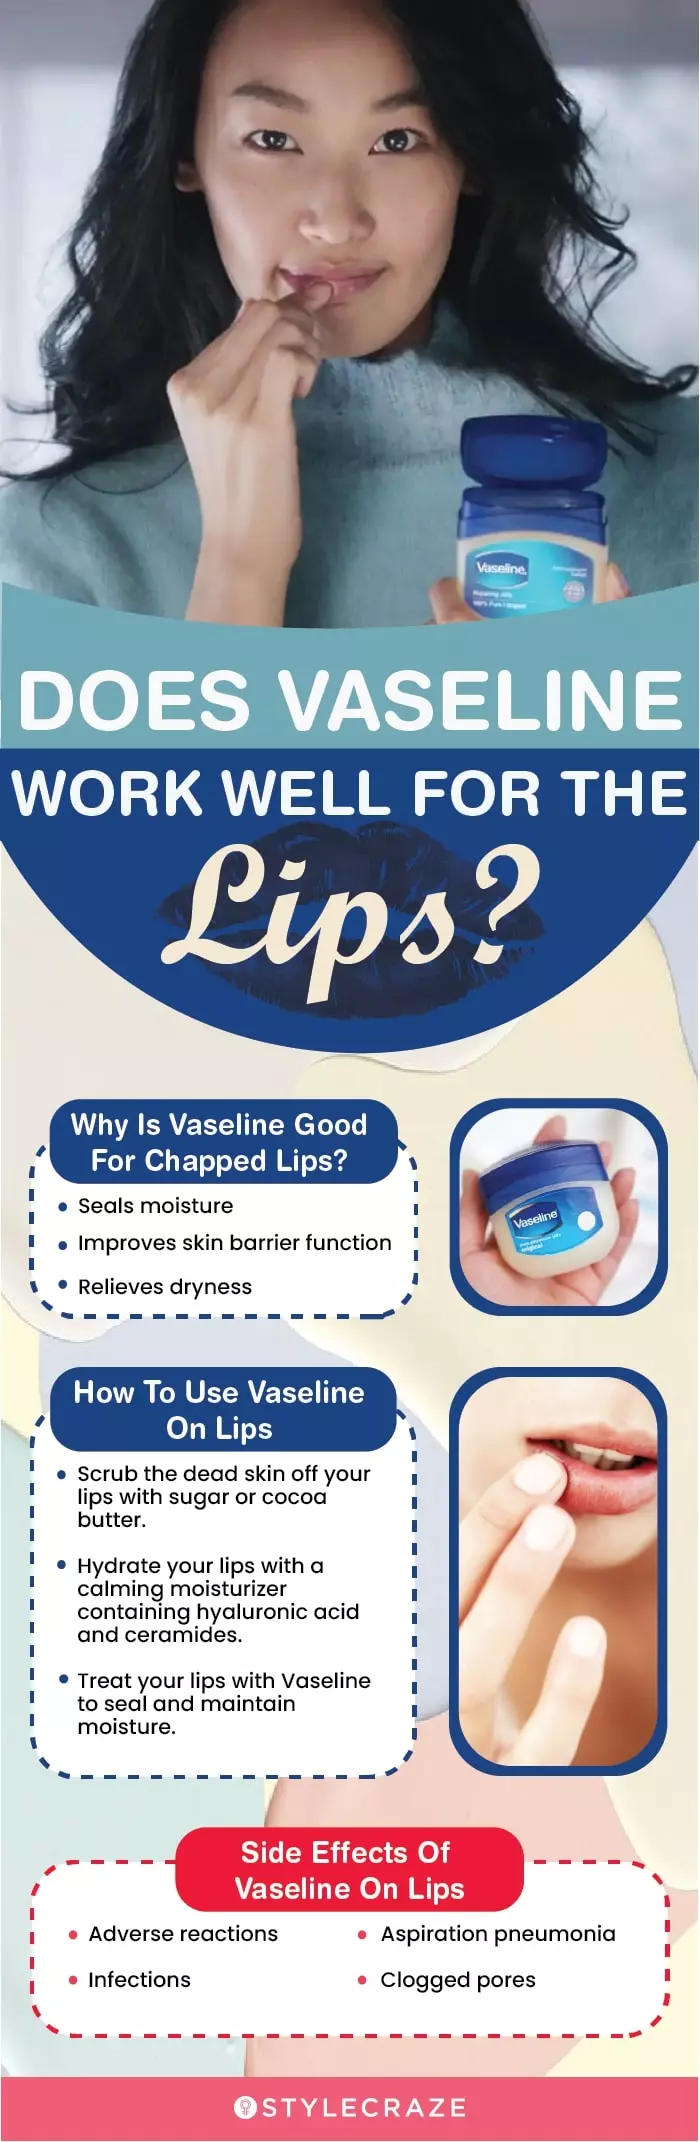 does vaseline work well for the lips (infographic)